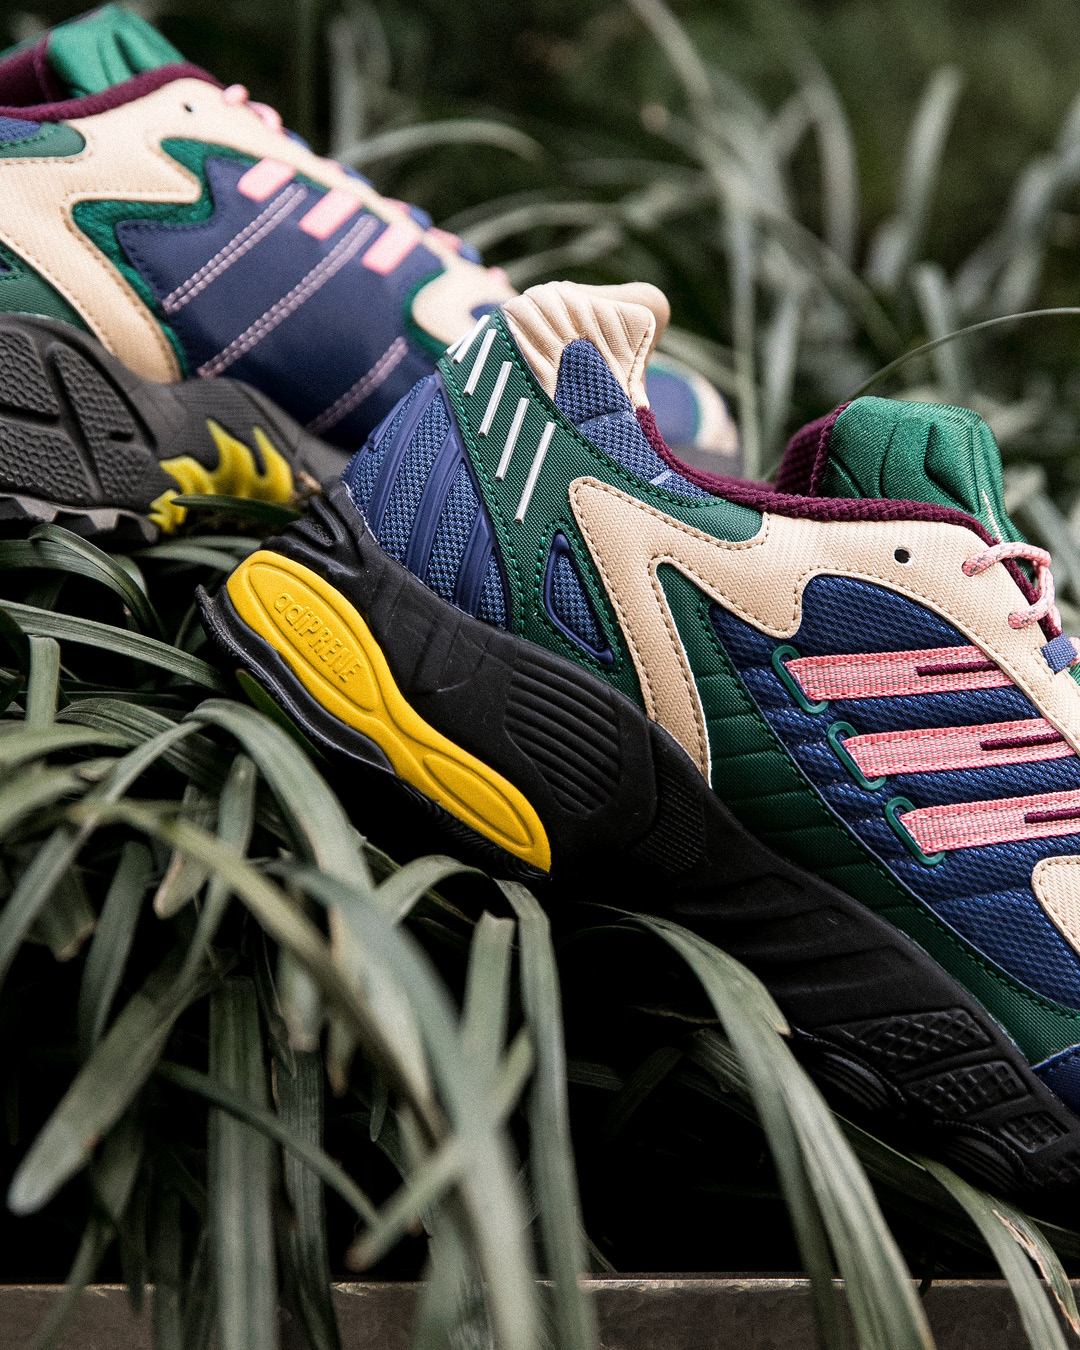 West NYC on Twitter: "Initially released as an update to the early-2000s @ adidas #Torsion Trediac #trailrunner, the TRDC adopts its predecessor's rugged, aggressive attitude. Available in Tech Indigo/Glory Pink/Collegiate Green, online